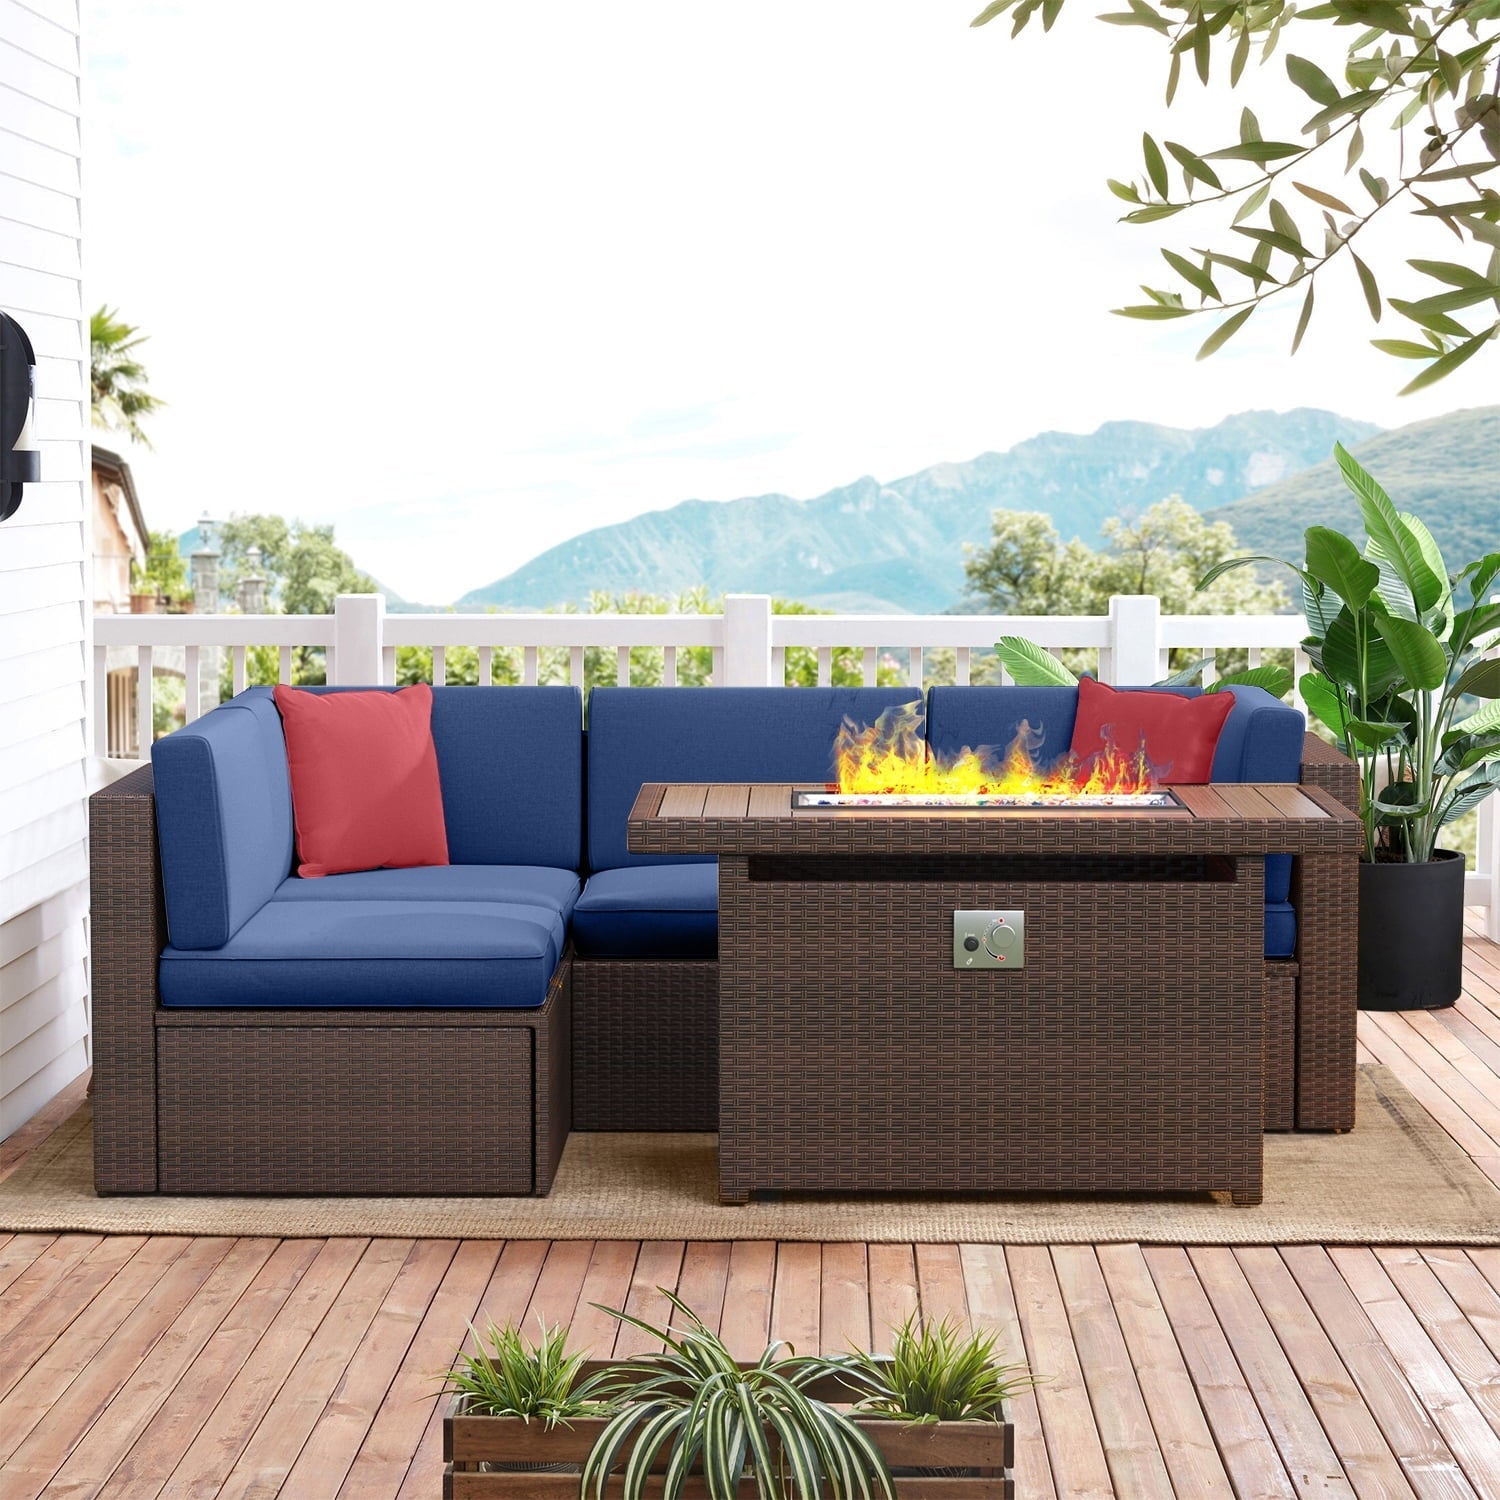 5 Piece Patio Furniture Set, Outdoor Patio Furniture Sets with Fire Pit, Wicker Patio Furniture, Outdoor Conversation Set with Blue Cushions